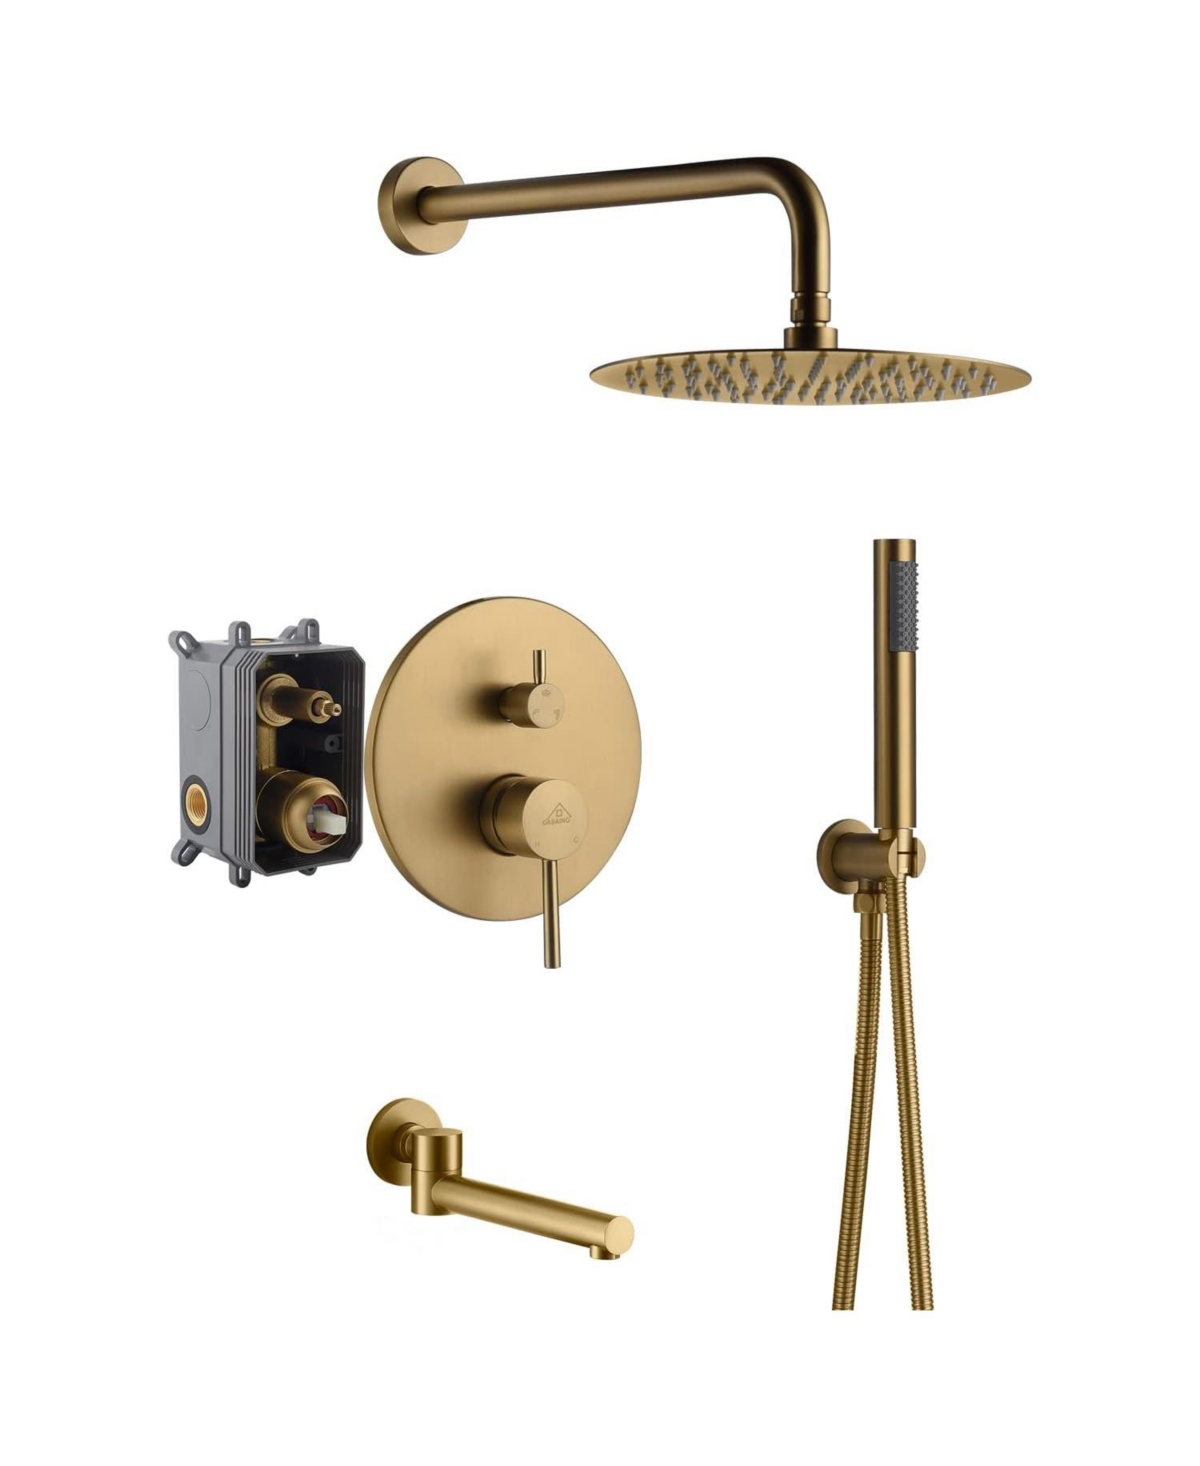 10" Inch Wall Mounted Round Shower System Set with Handheld Spray & Rotating Tub Spout - Brushed gold